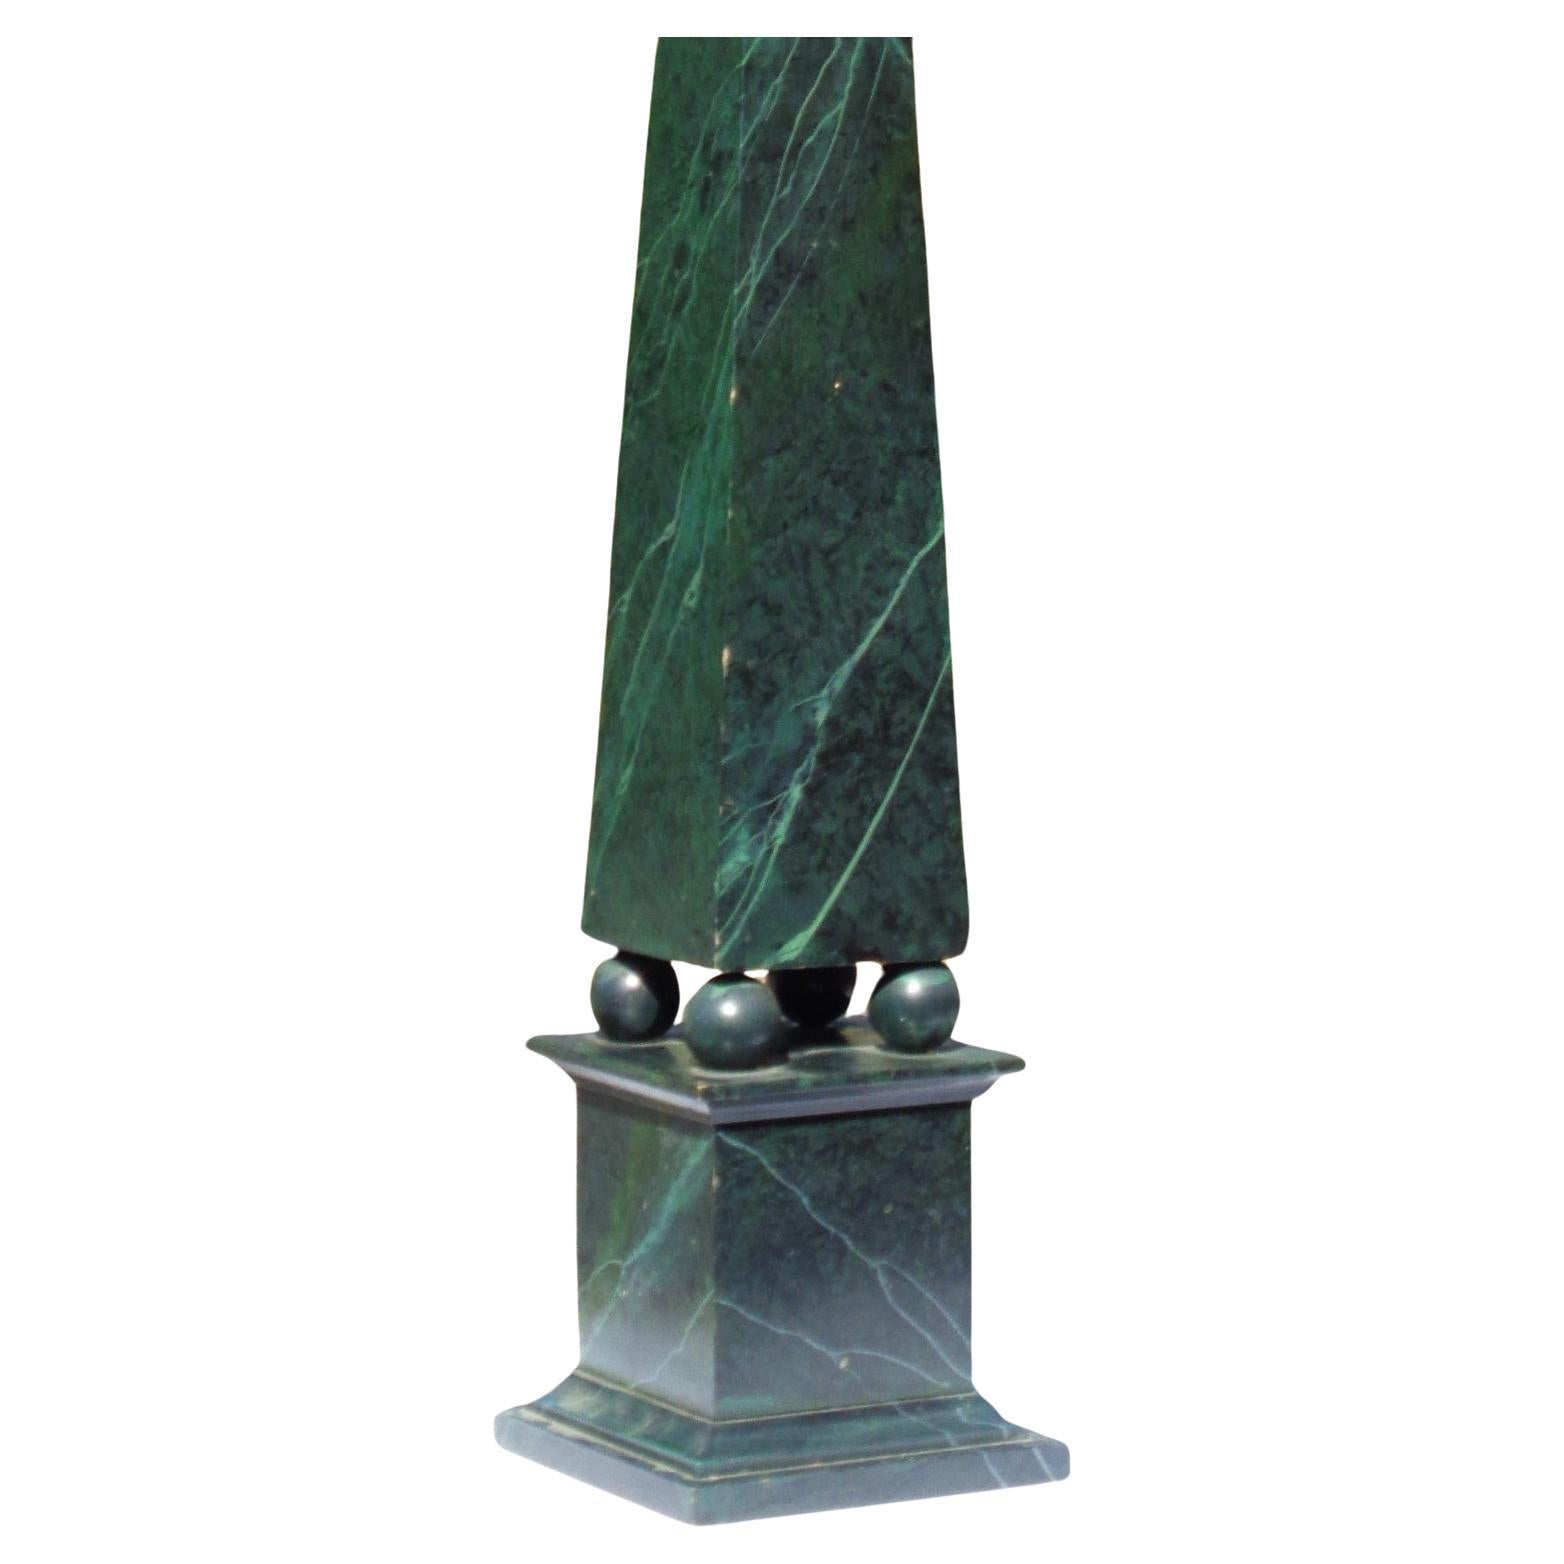 Large Neoclassical style wood obelisk in original verde antigua faux marbleized painted finish. Initially used as a store display. Circa 1960's. Measures 38 1/2